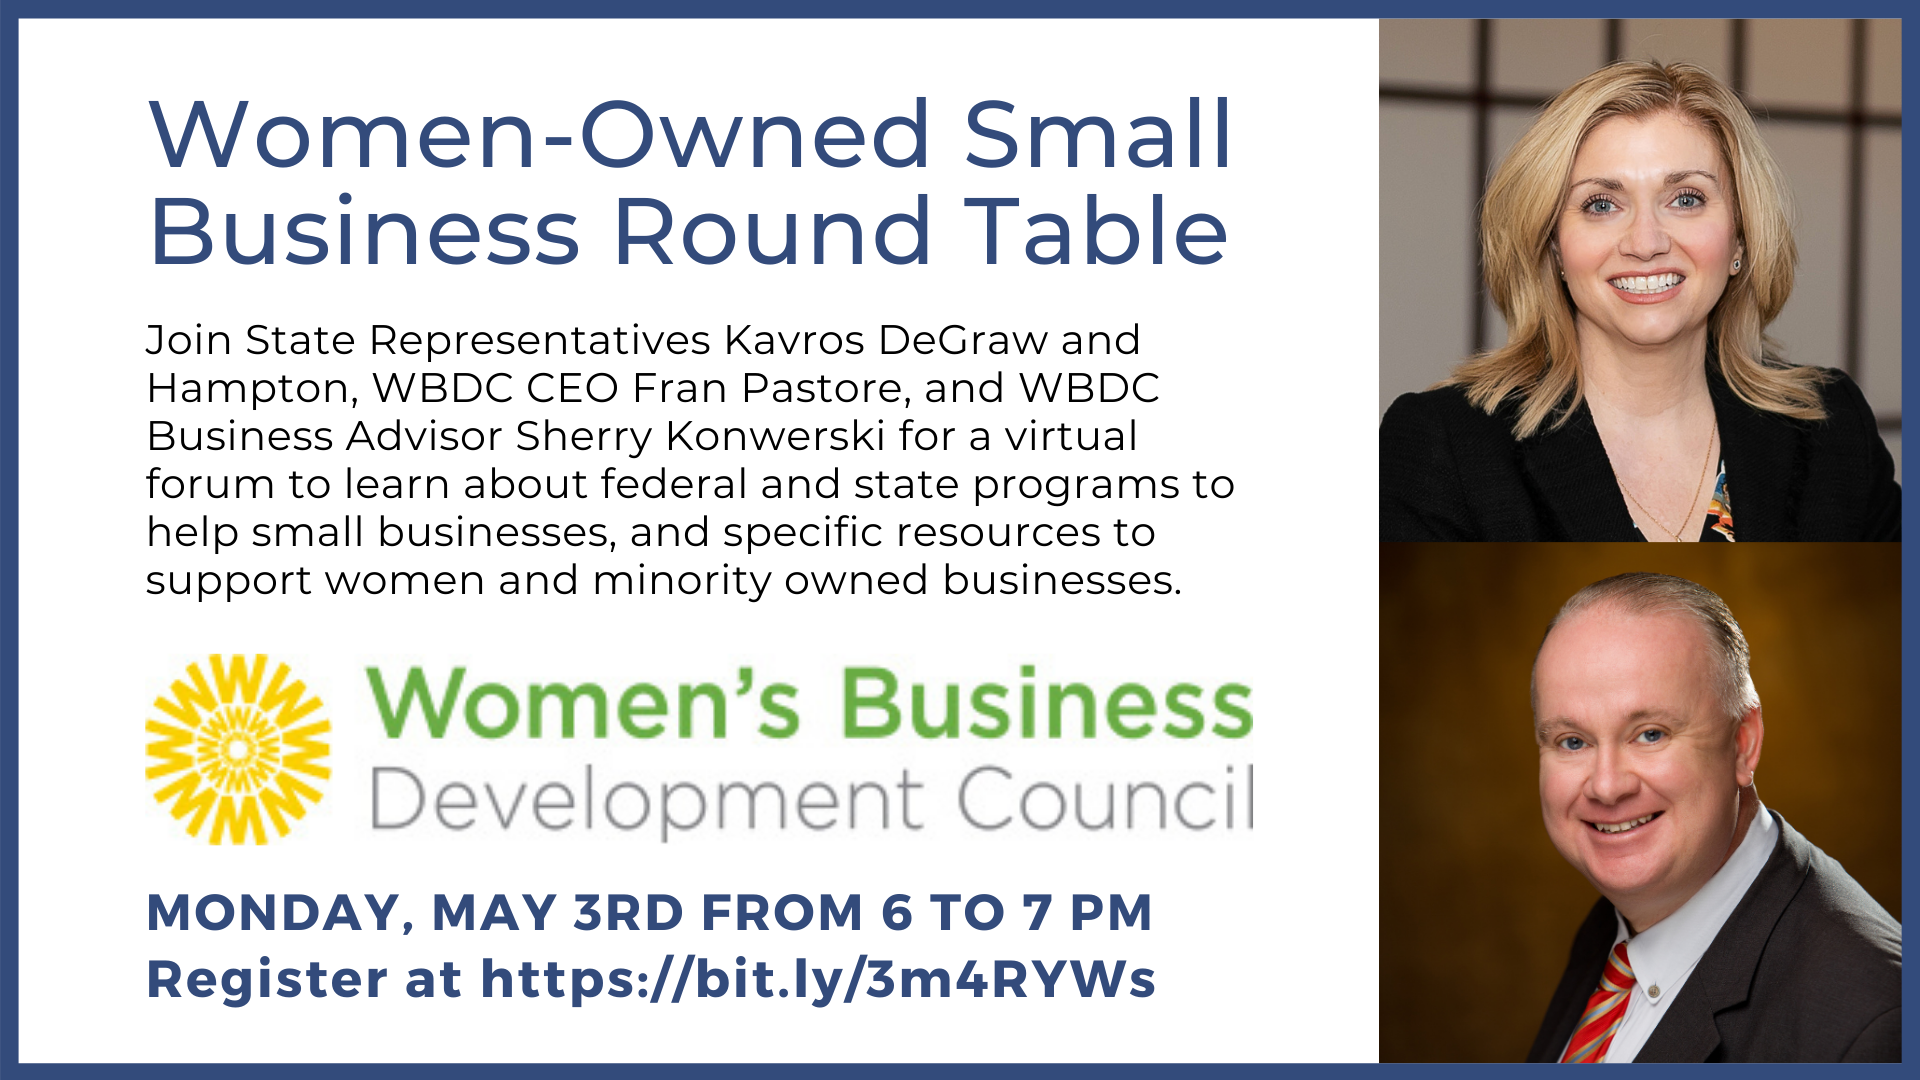 Women-Owned Small Business